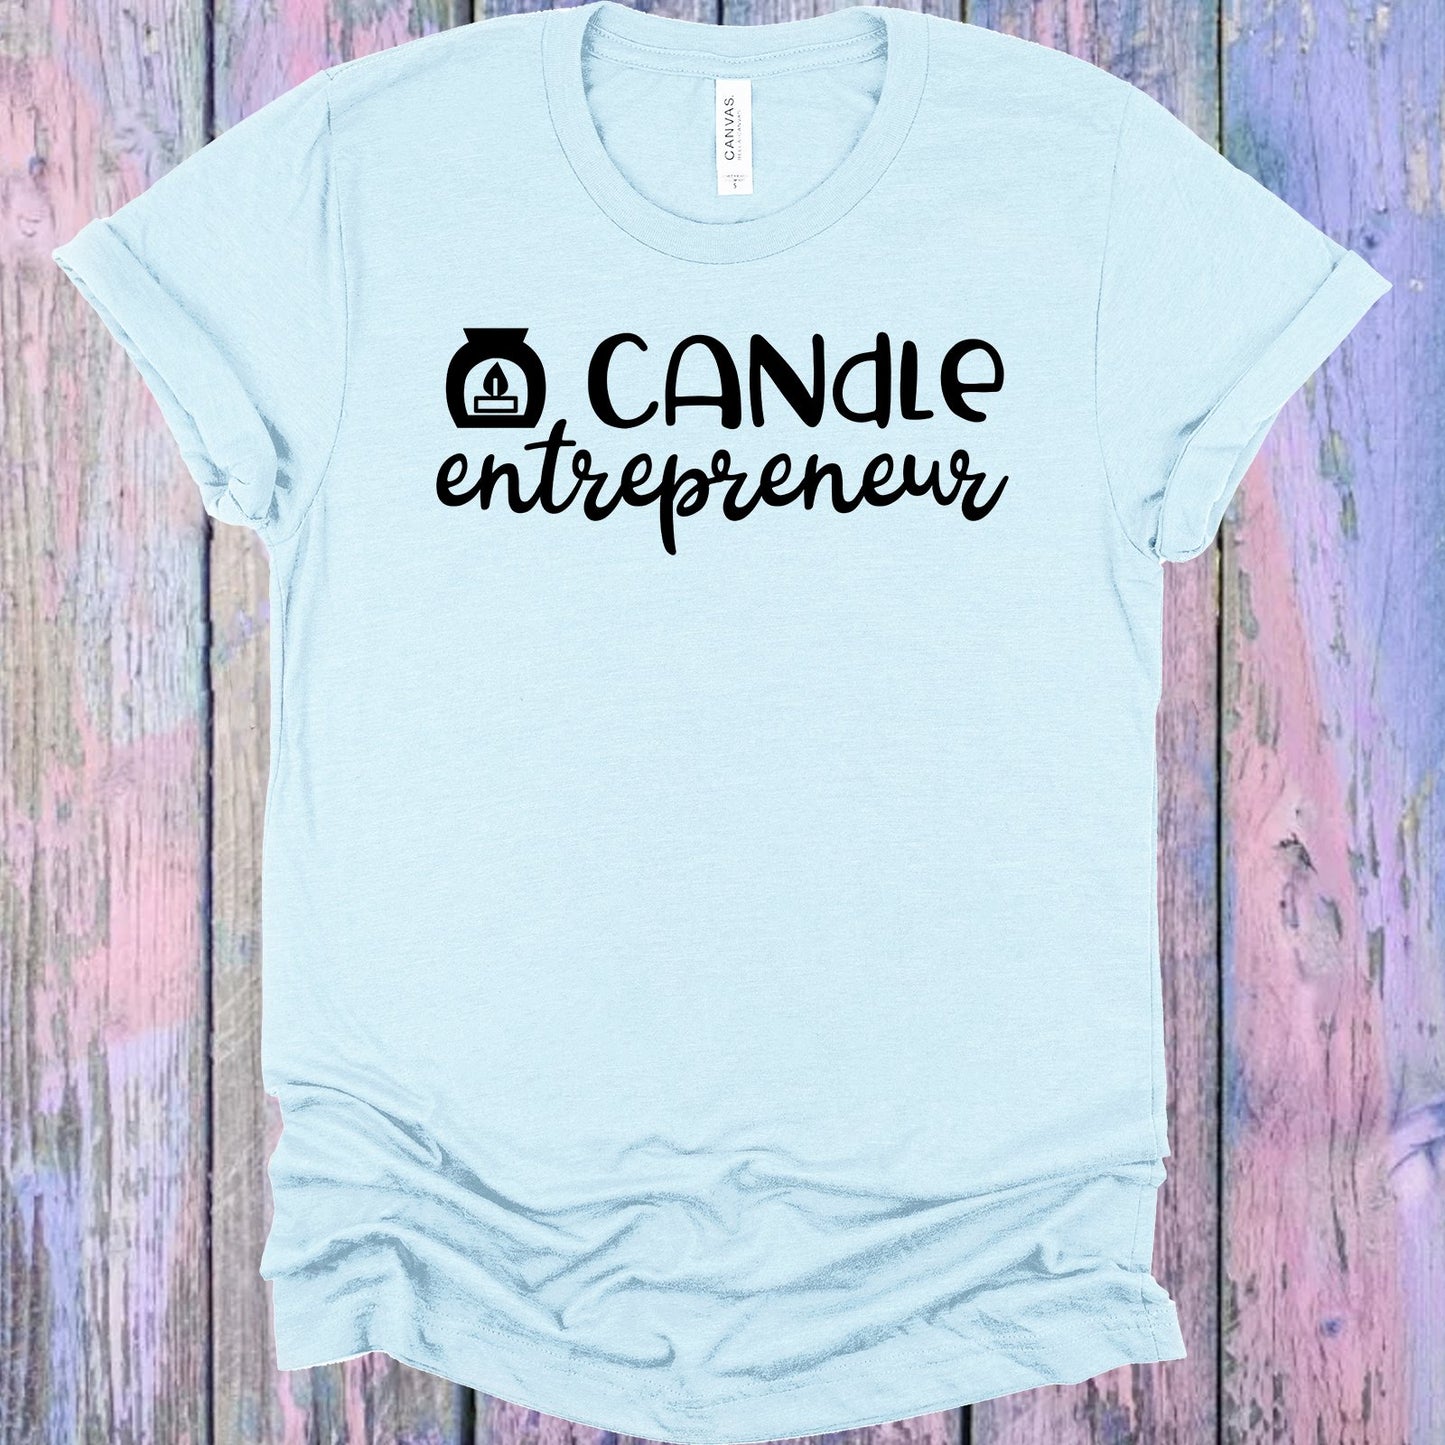 Candle Entrepreneur Graphic Tee Graphic Tee